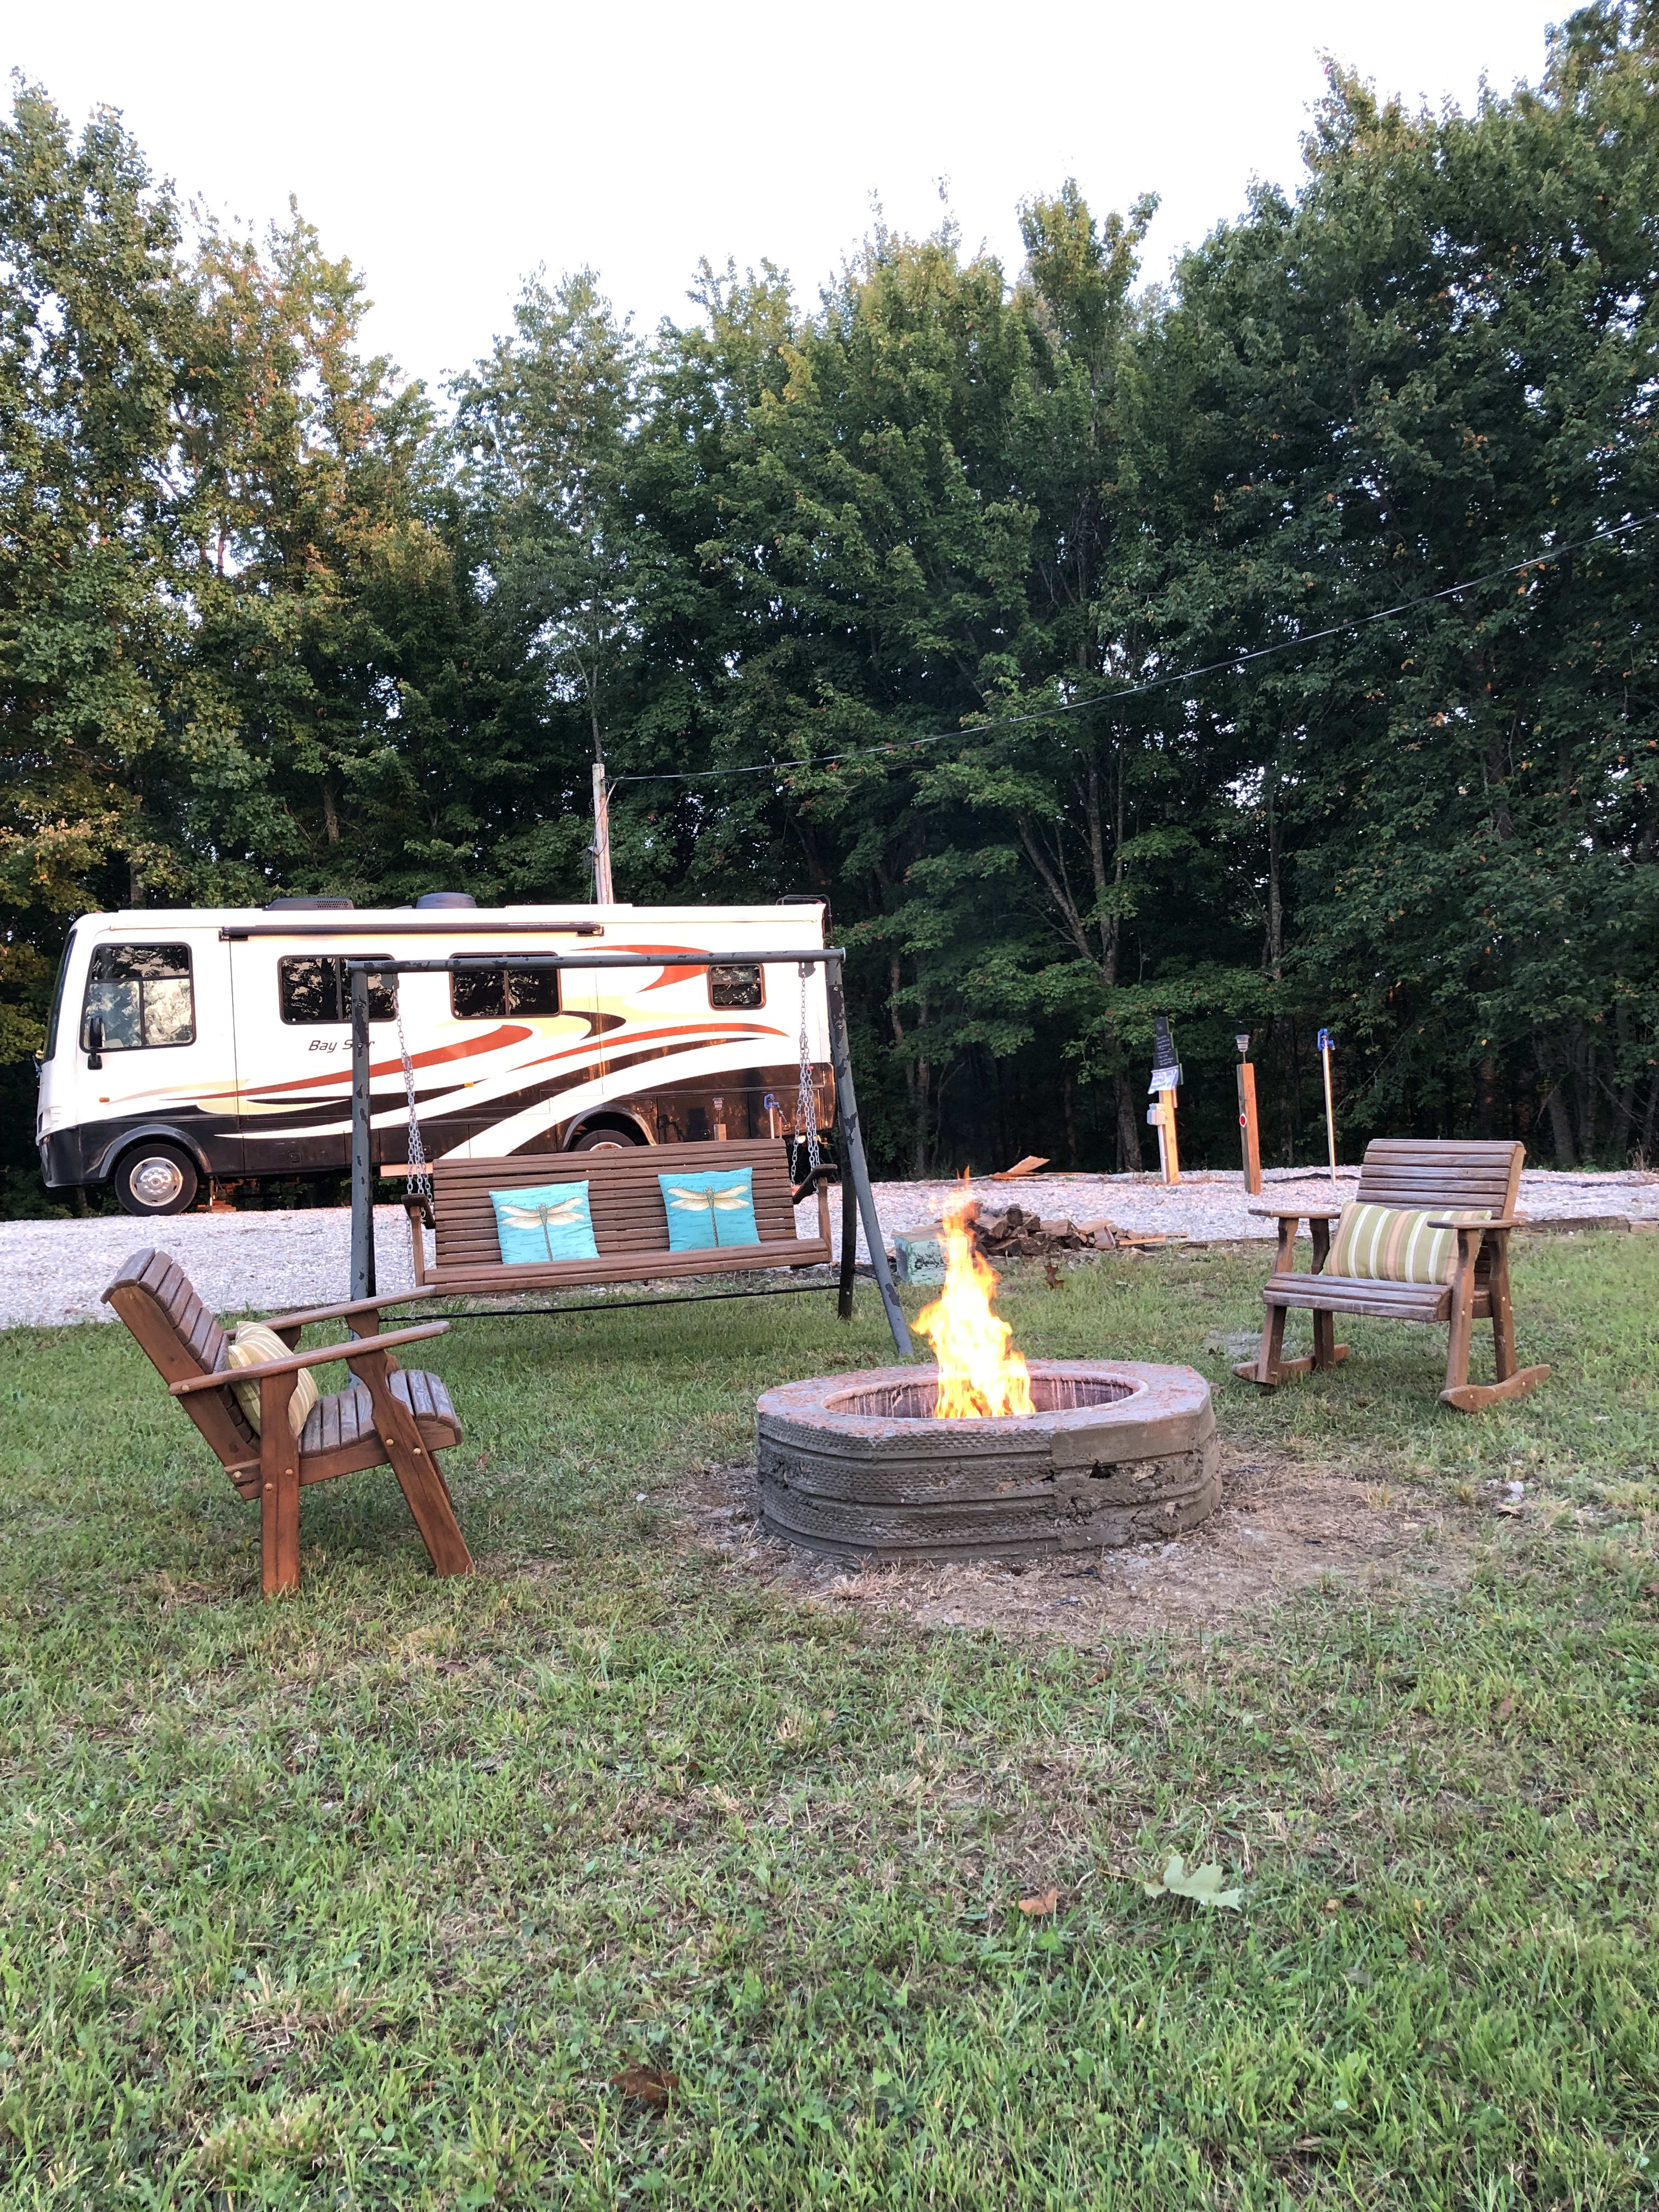 Enjoy our fire pit while you’re here.